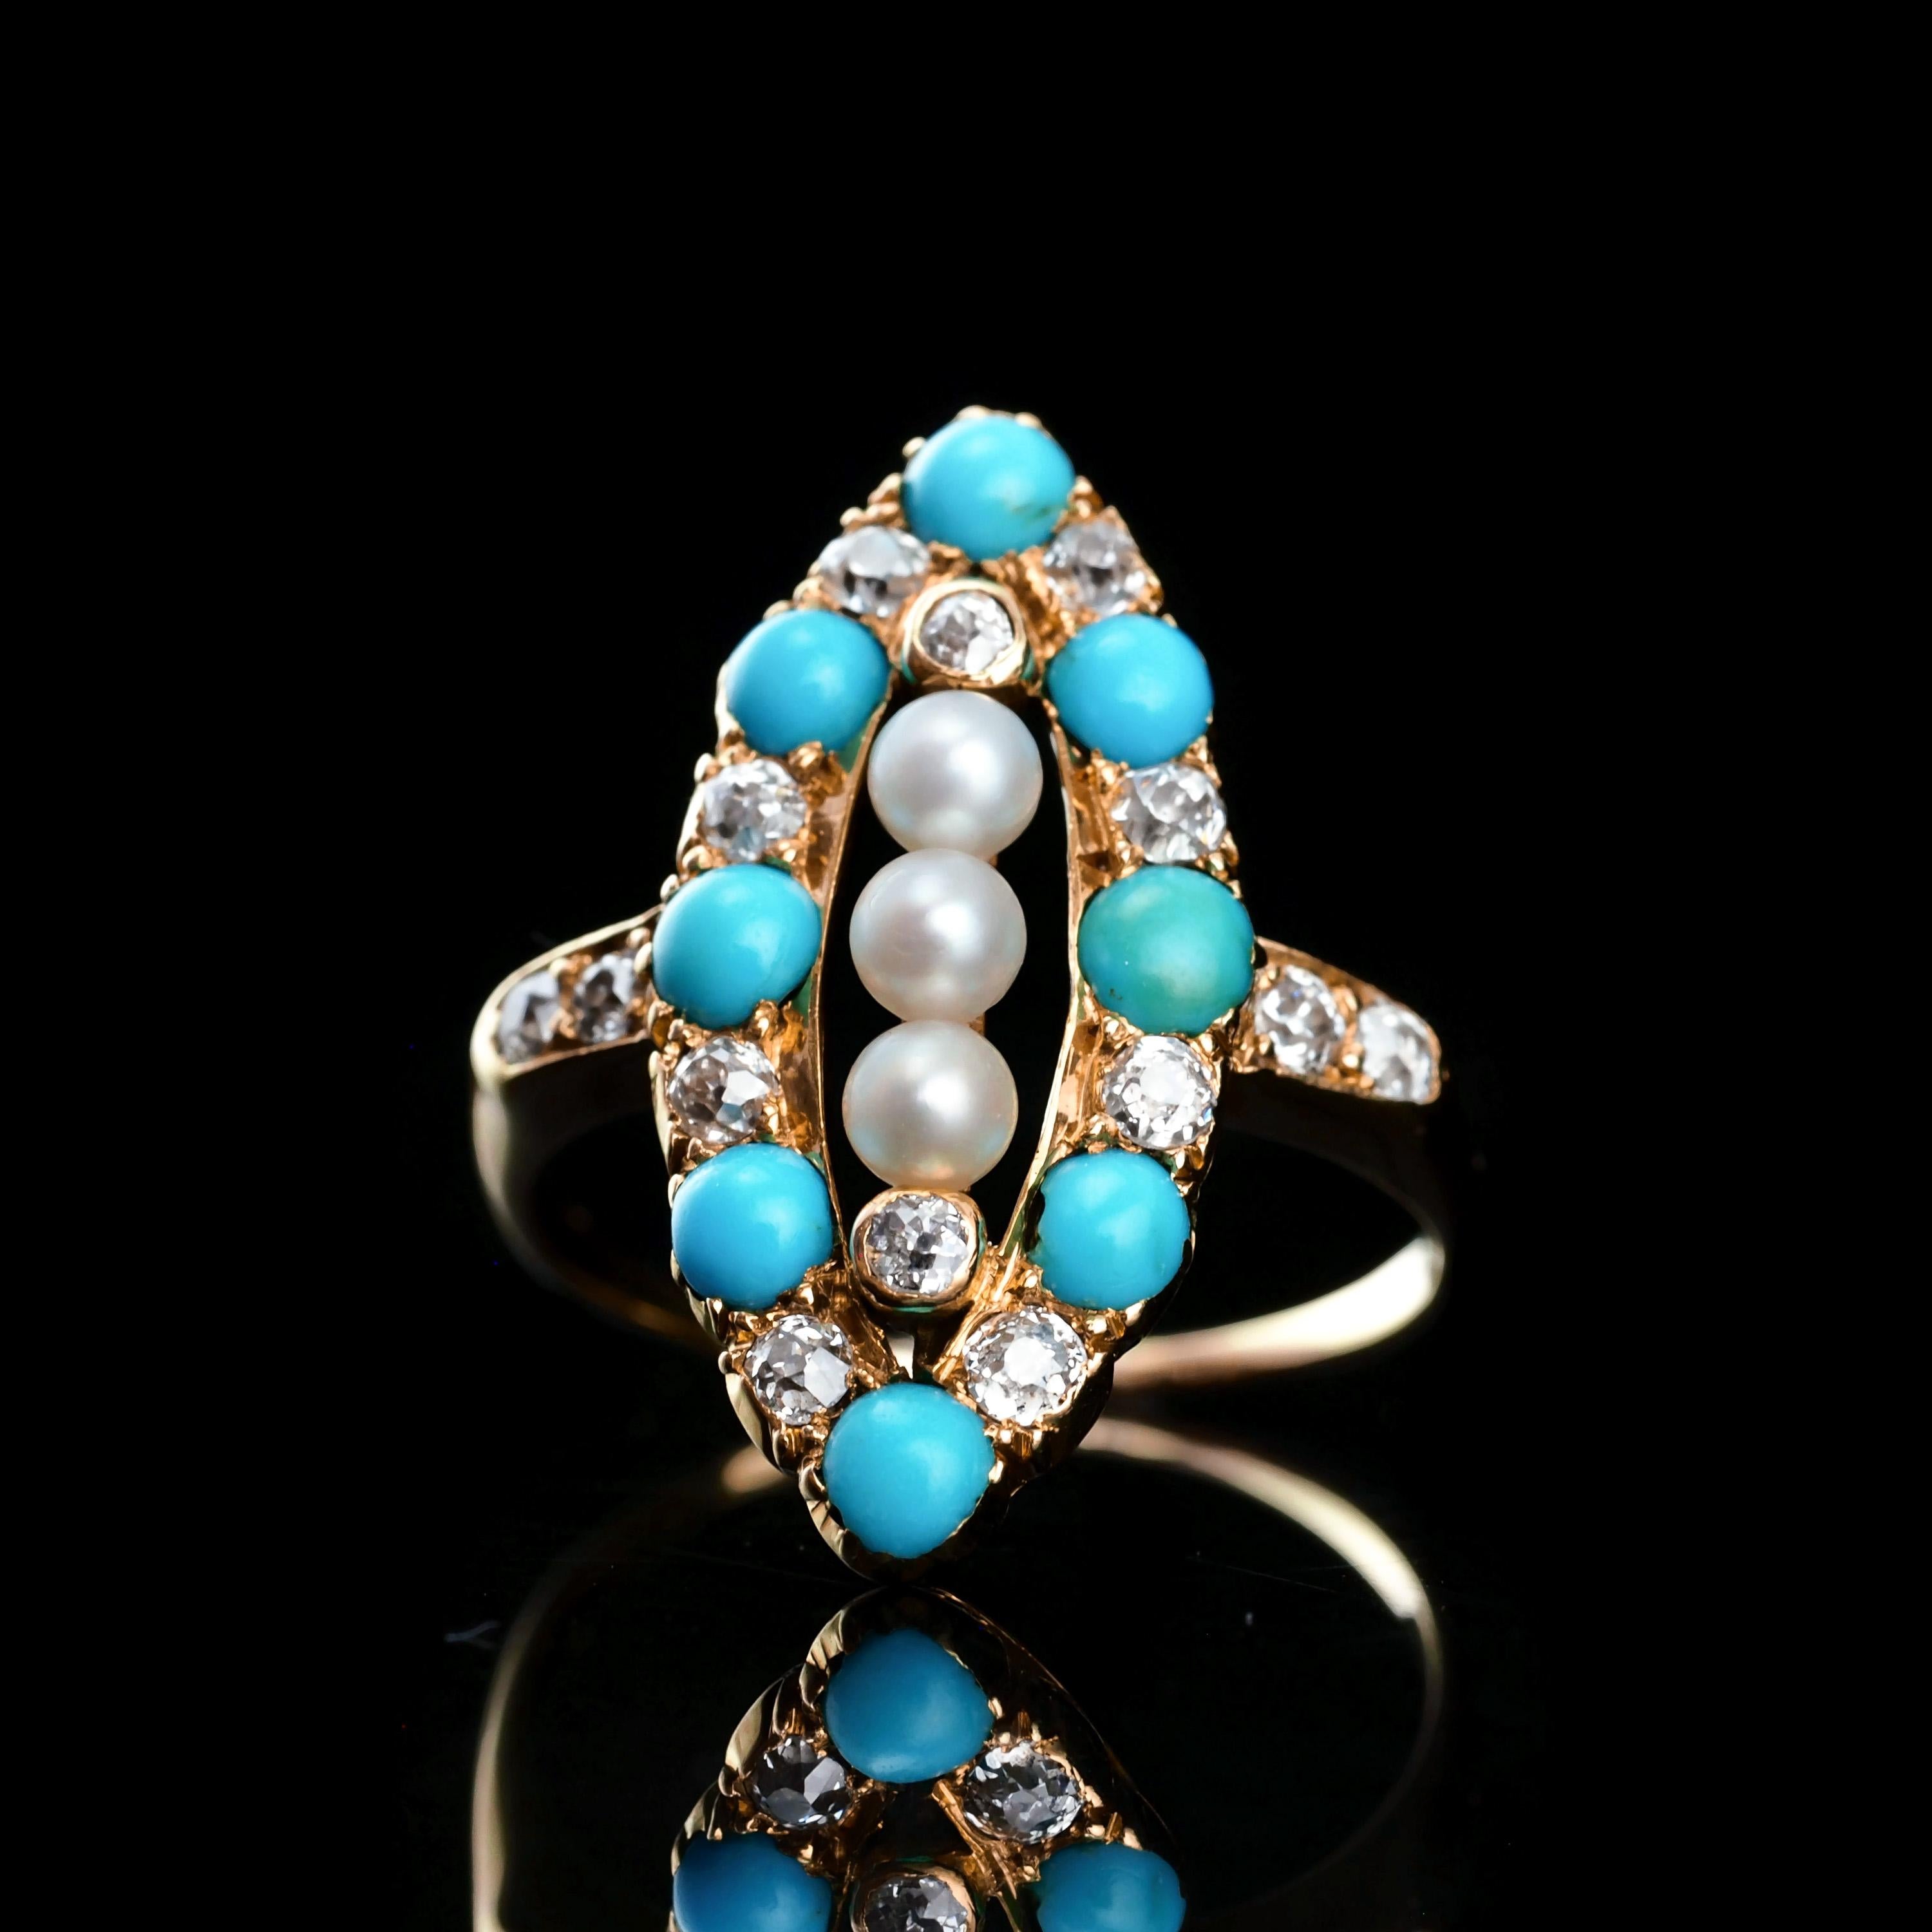 Antique Victorian Diamond Pearl Turquoise 18K Gold Ring Navette/Marquise c.1880 For Sale 6